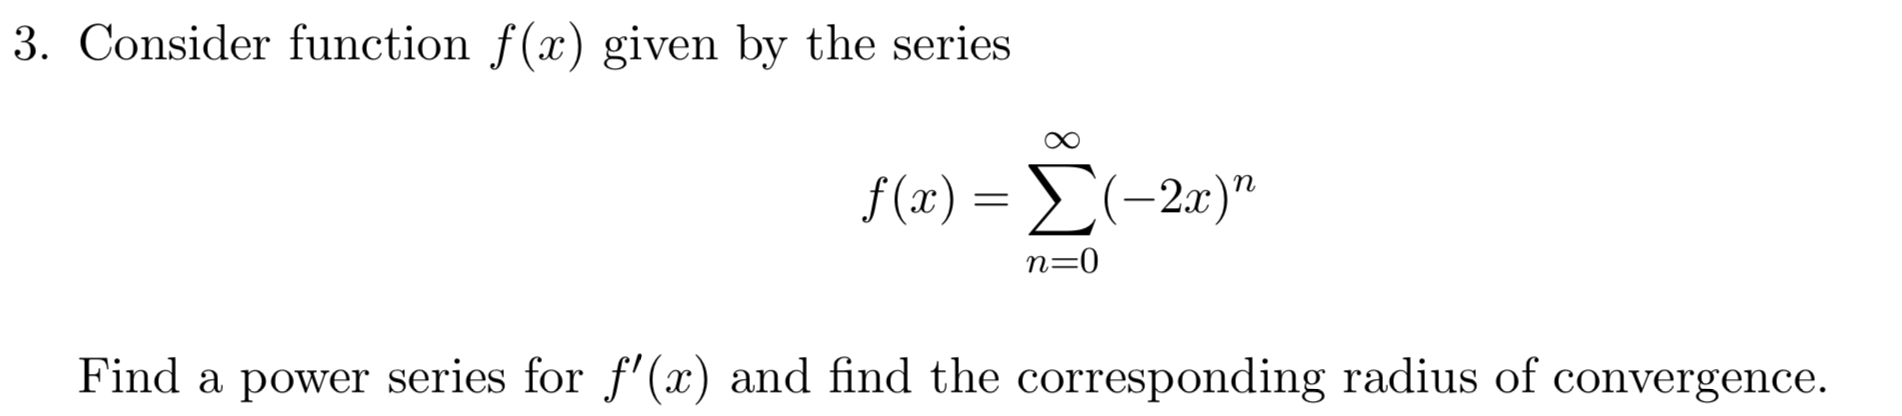 3. Consider function f(x) given by the series
8∞
f(1) Σ- 2π)"
n=0
Find a power series for f'(x) and find the corresponding radius of convergence.
